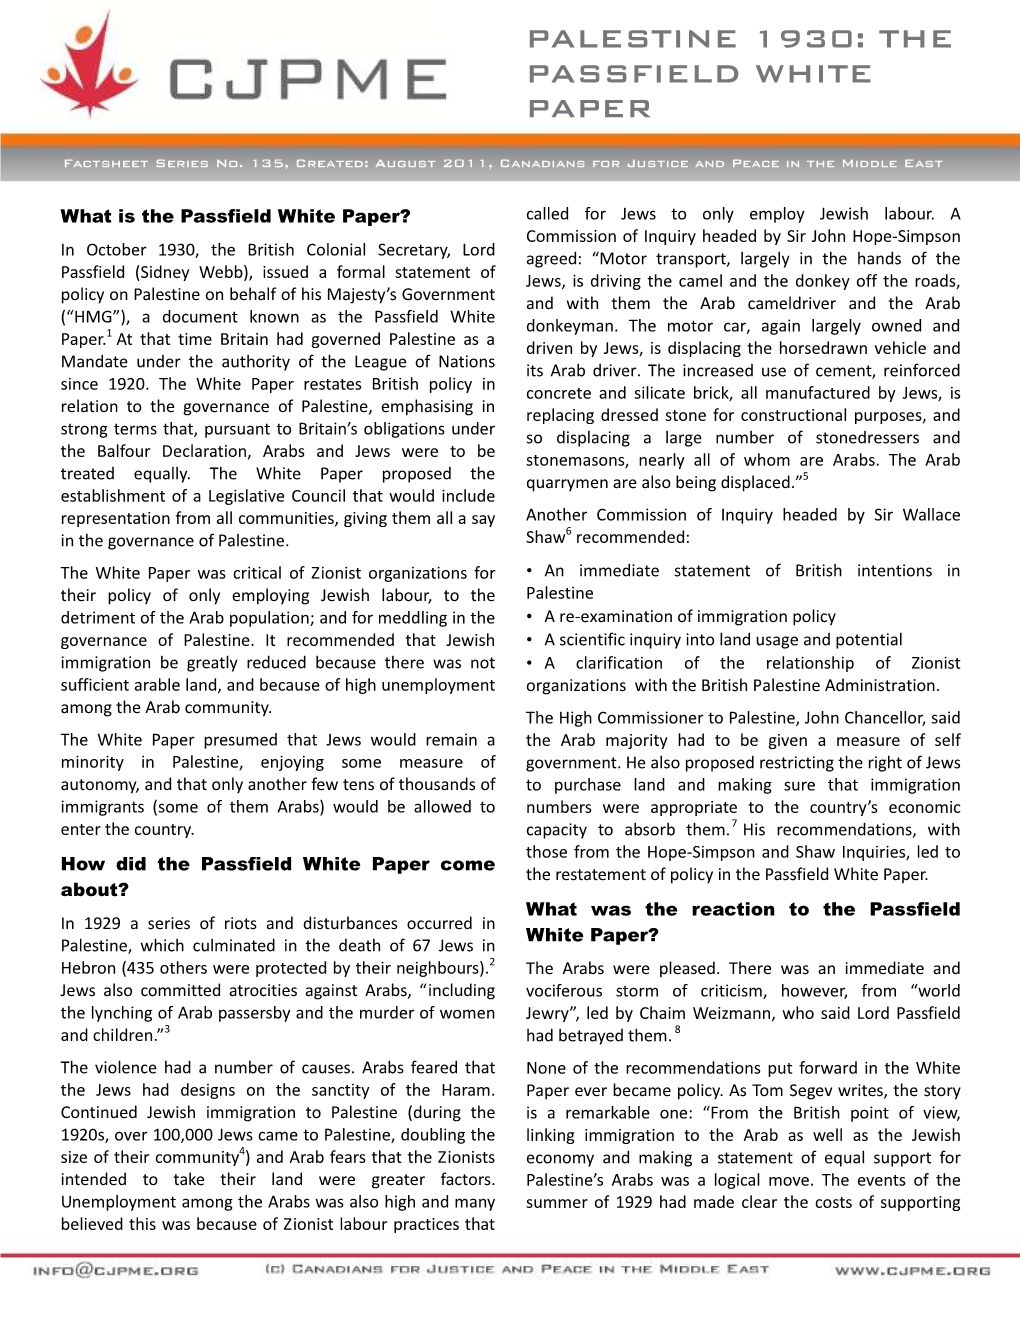 The Passfield White Paper